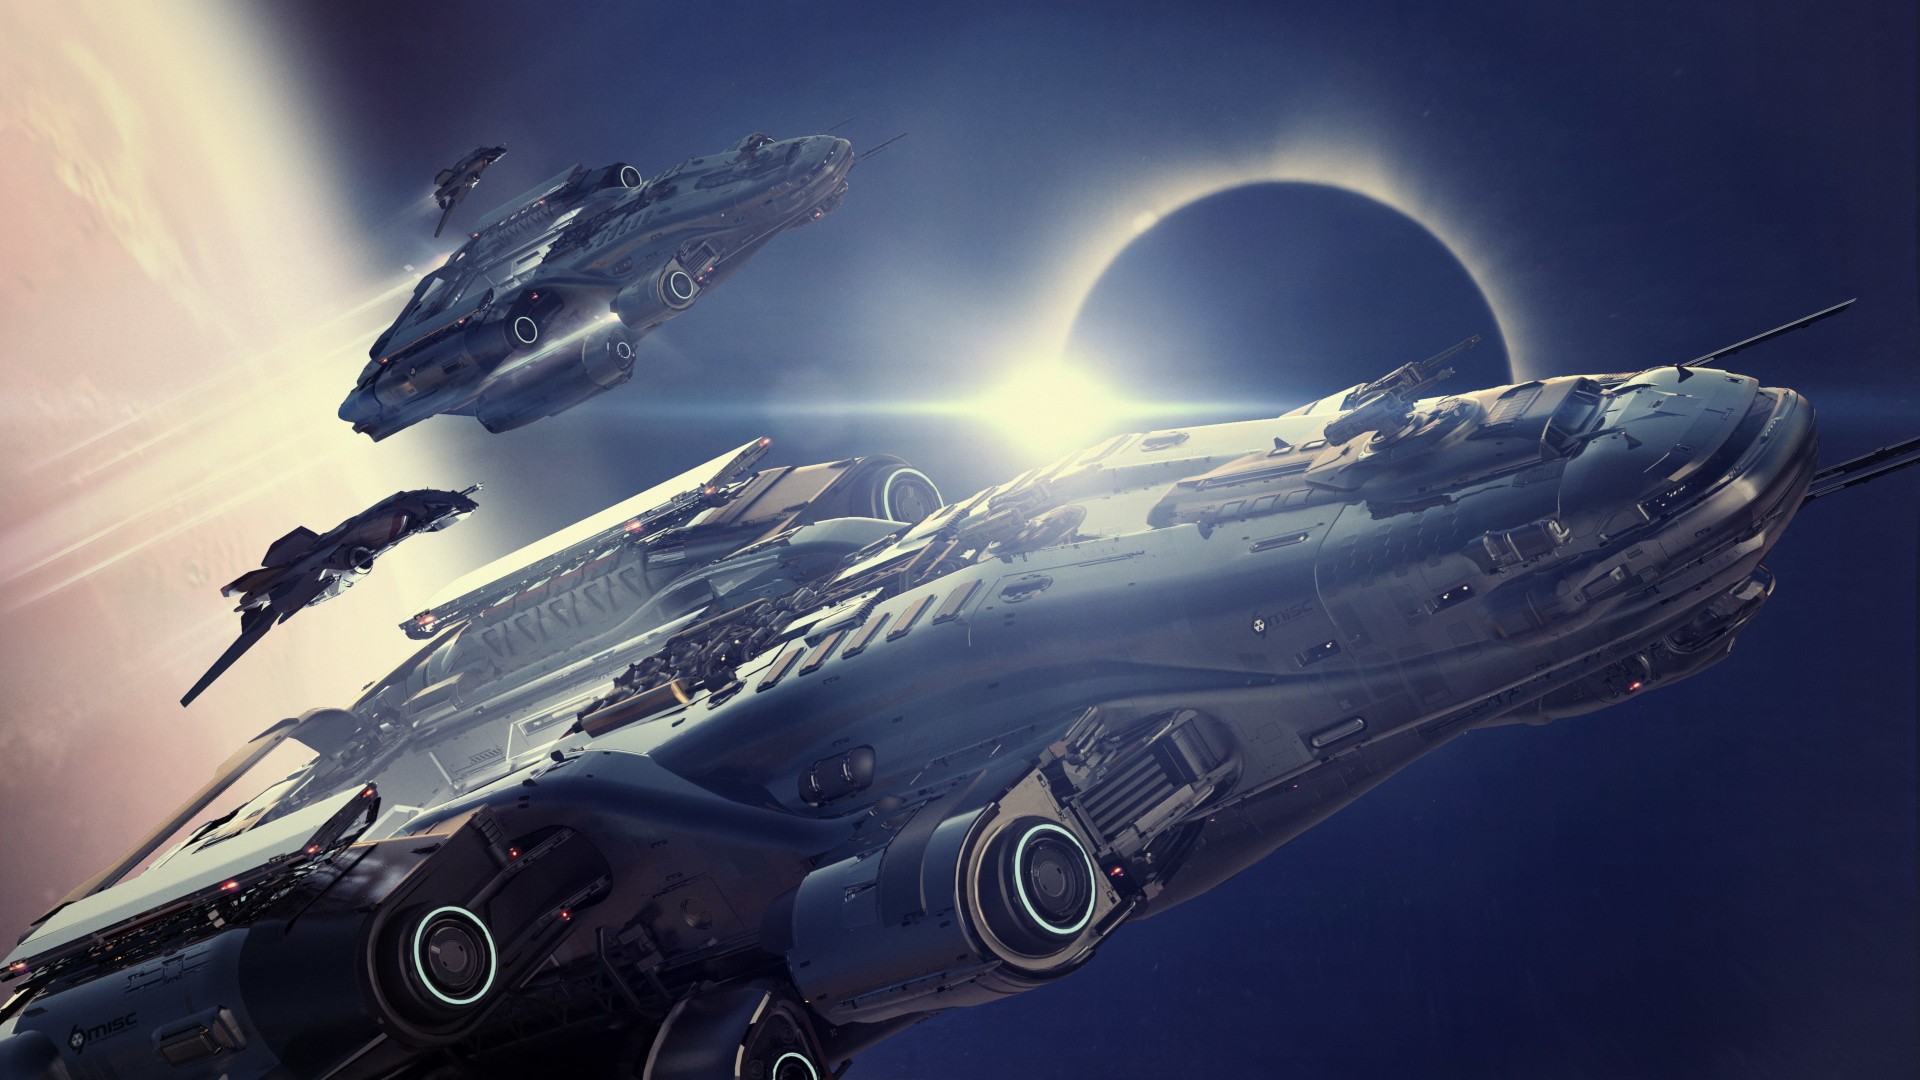 Star Citizen Introduces Its Most Advanced Exploration Ship, the MISC